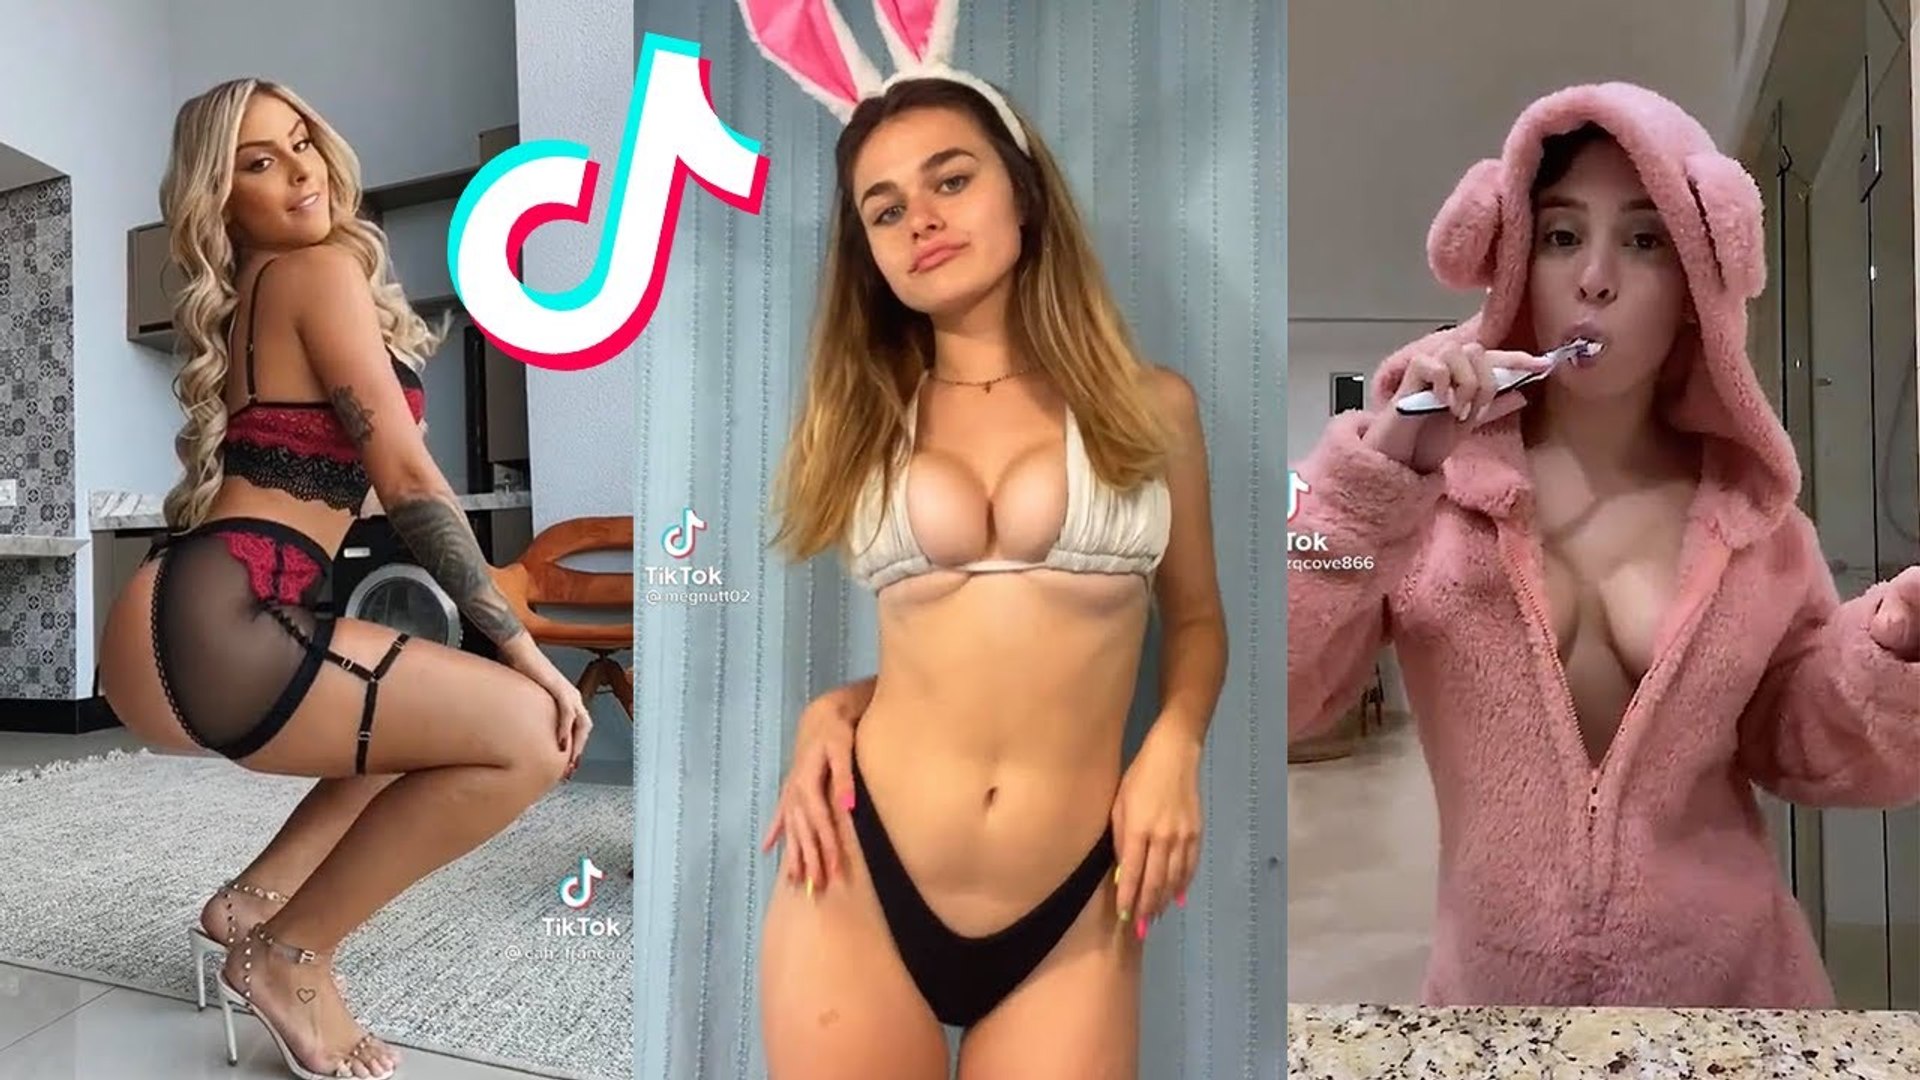 ahmad mohamadian recommends sexy tik toks pic